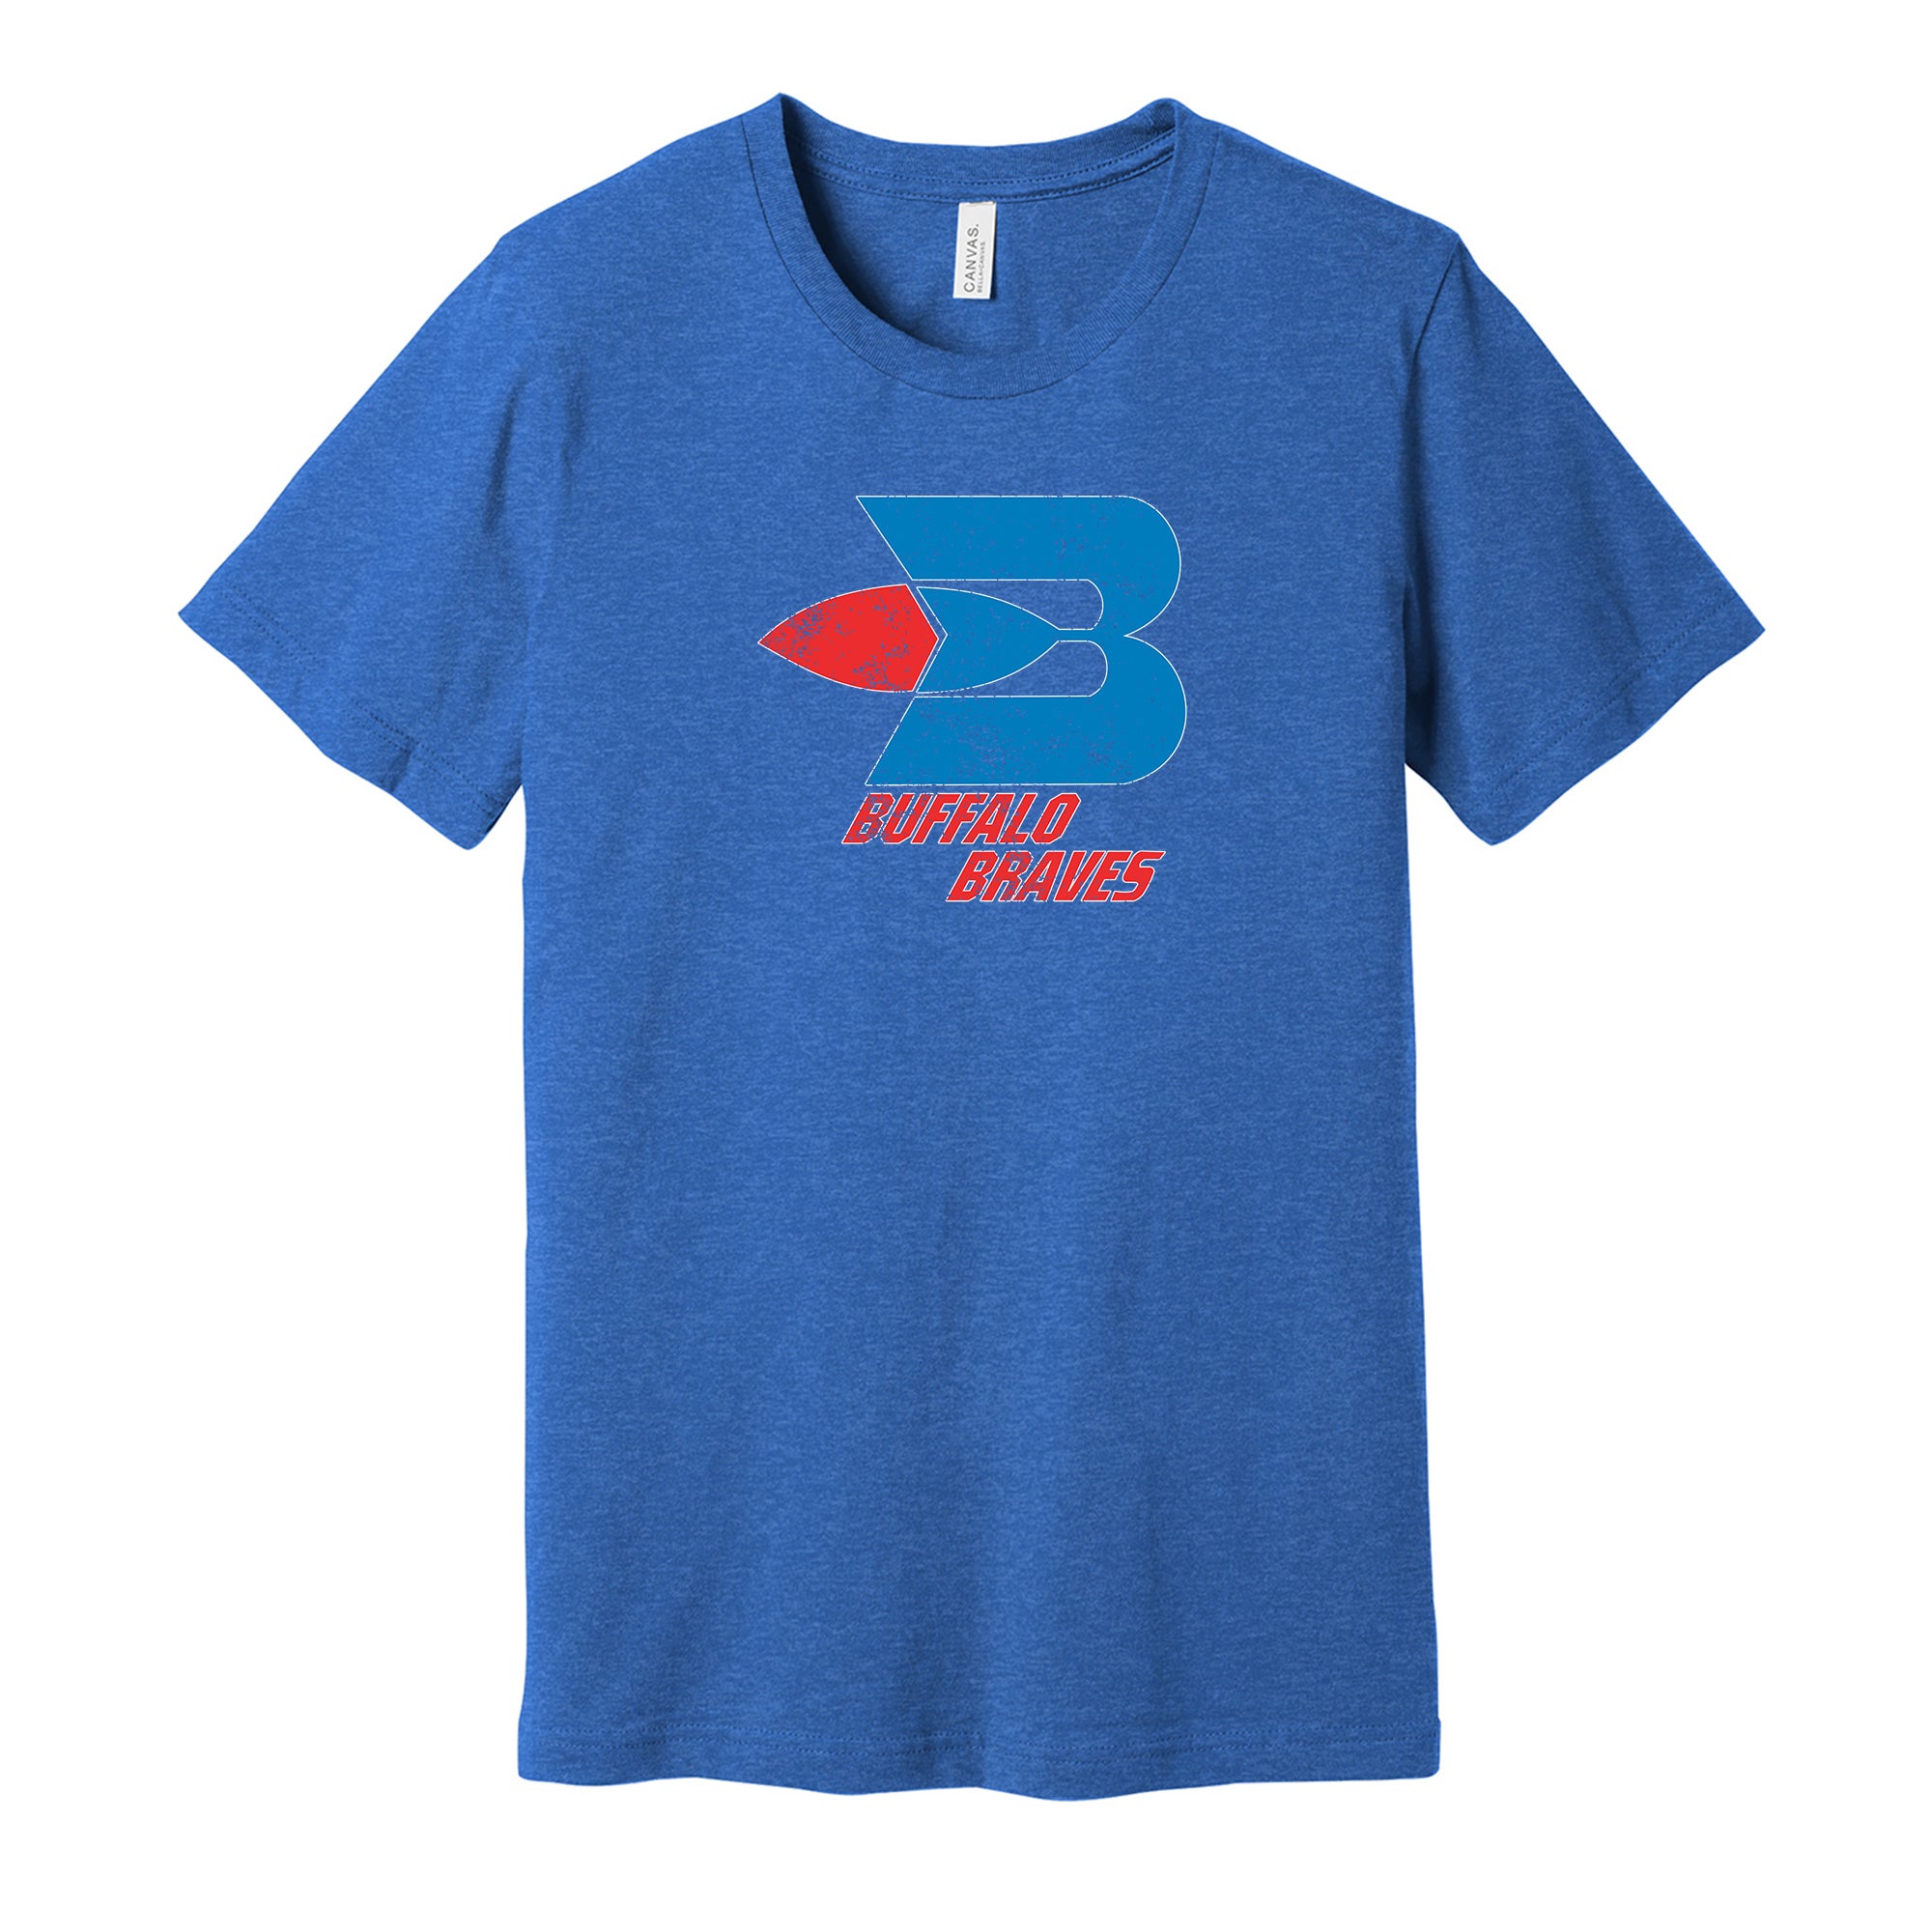 Hyper Than Hype Shirts Buffalo Braves Distressed Logo Shirt - Defunct Sports Team - Celebrate New York Heritage and History - Hyper Than Hype 3XL / Blue Shirt